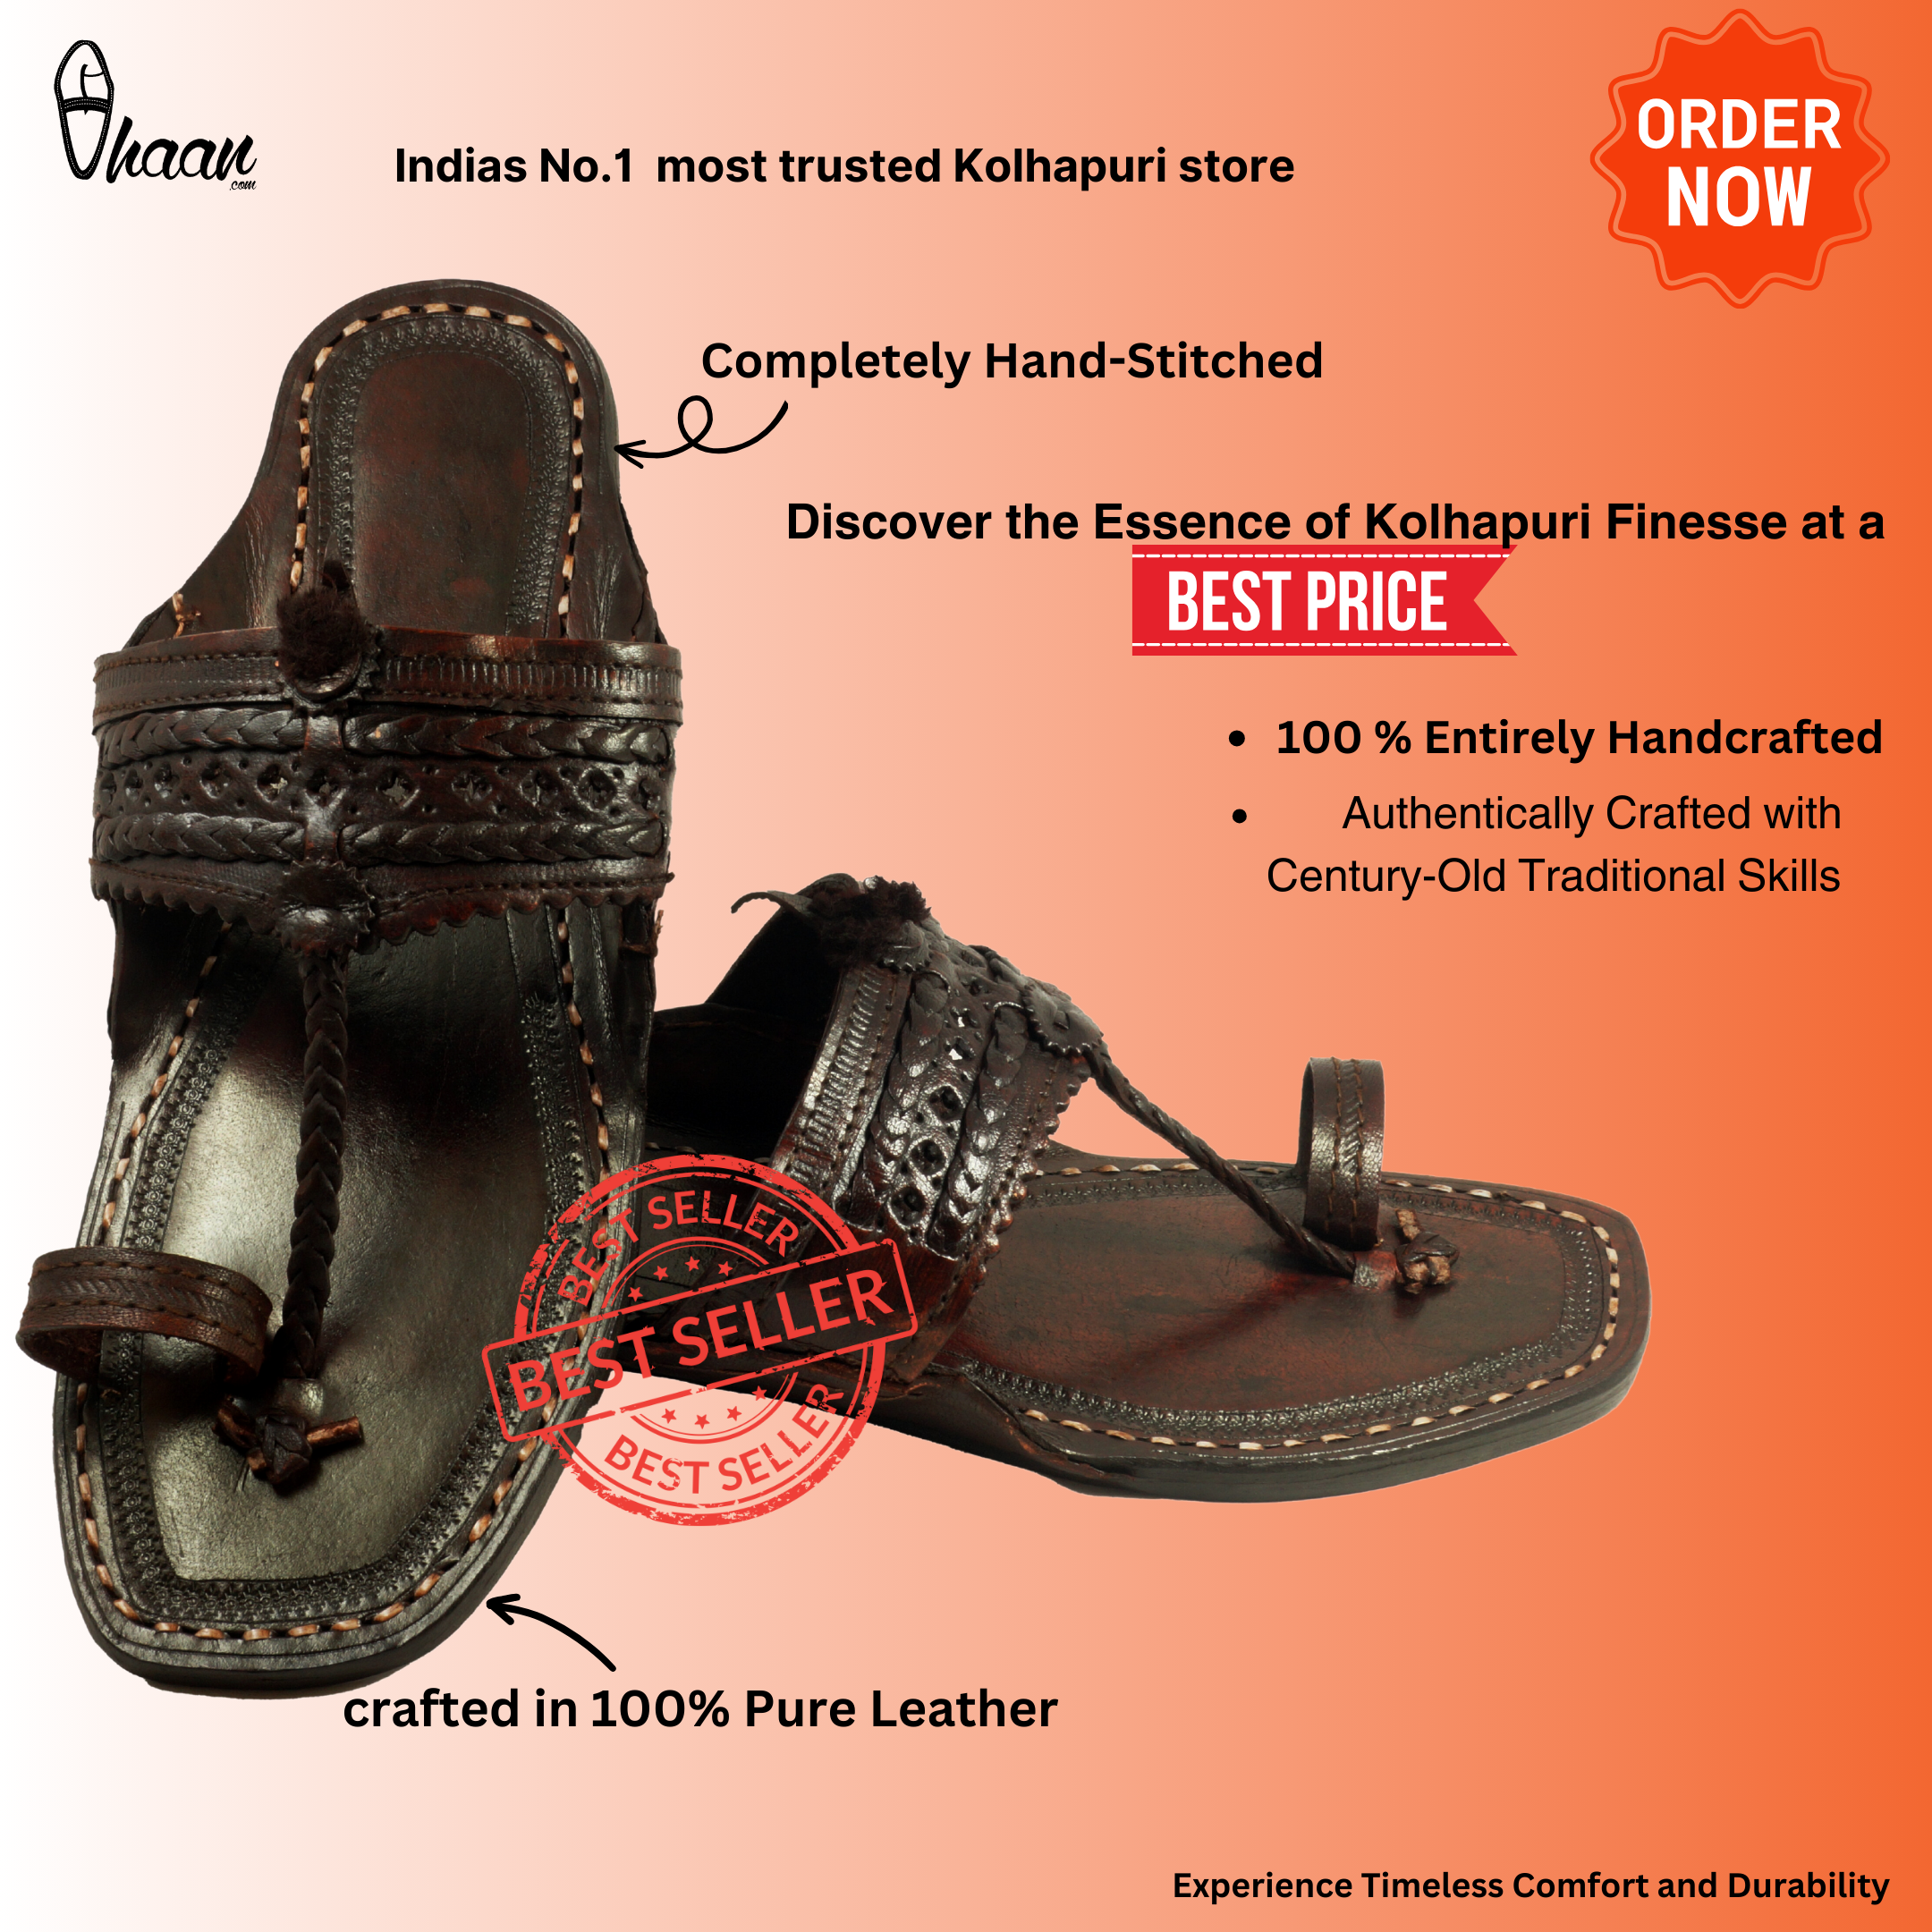 Powerhouse Collection - Pair of mens sandals from India